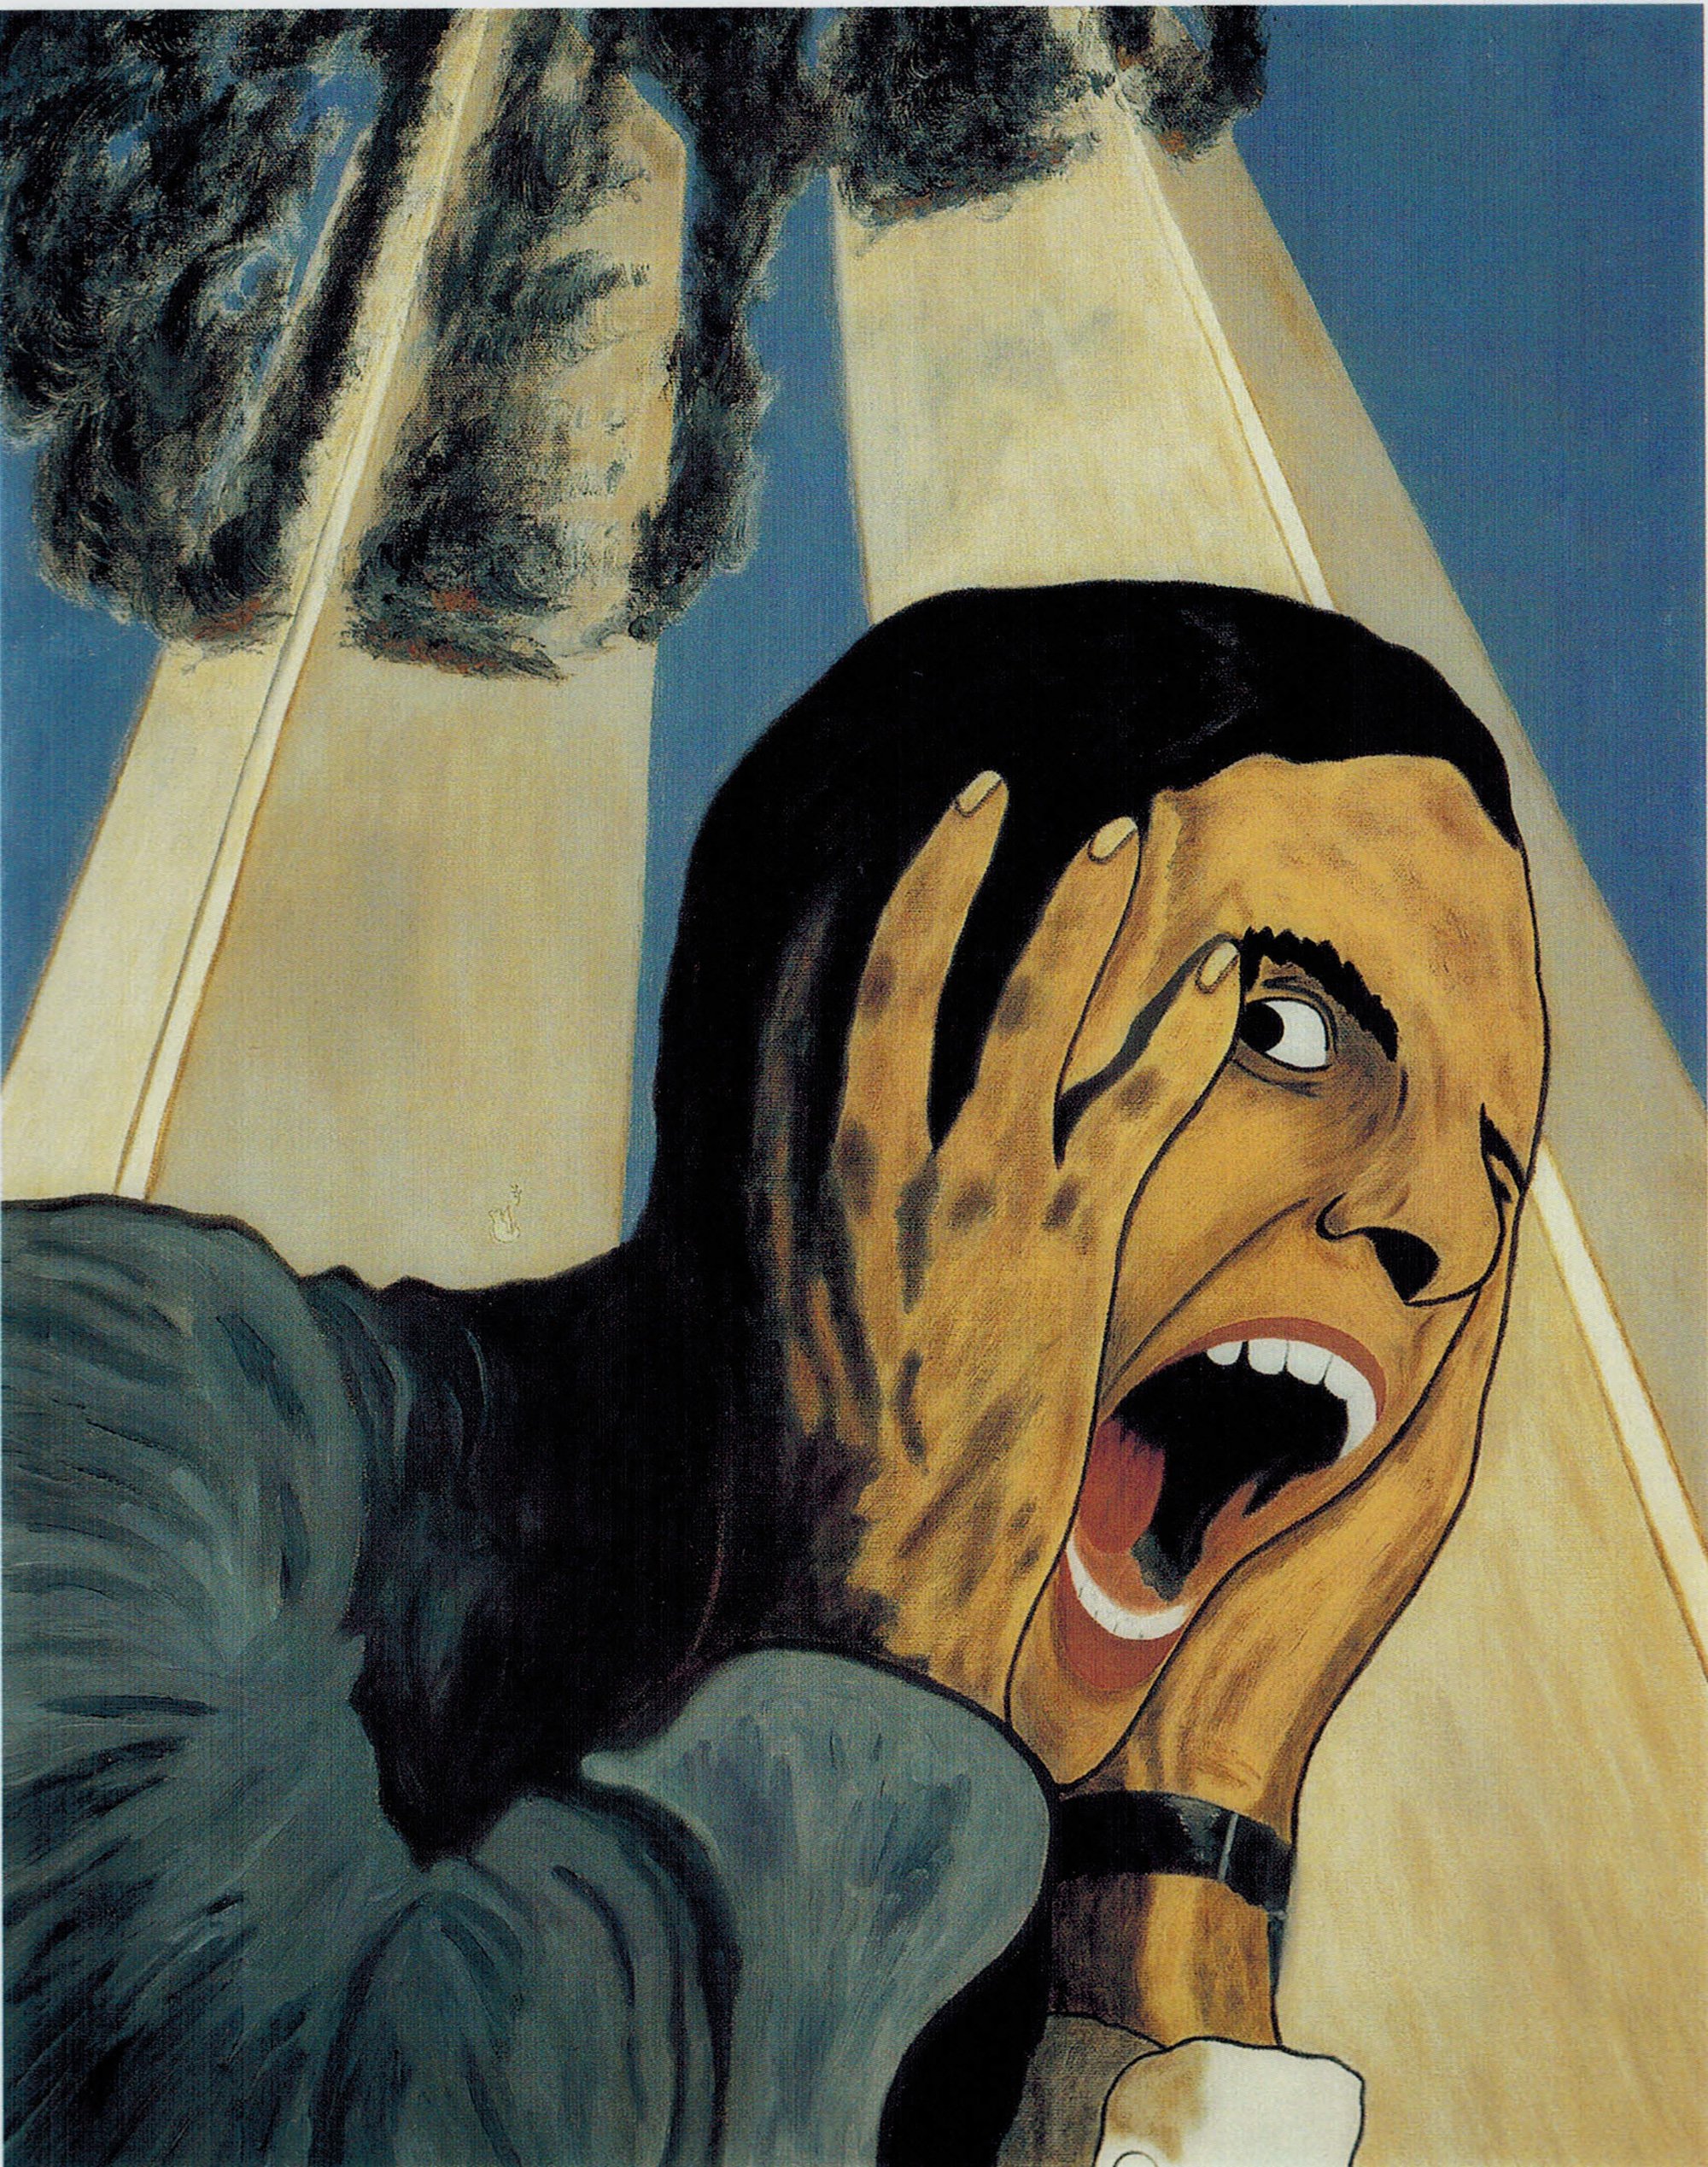 George Mullen, Sept 11 Art / 911 Art: The American Scream, 2002, 28" x 22", oil on canvas. Copyright © 2002 George Mullen. All Rights Reserved. "Nothing left to paint, nothing left to say...September 11 is an irreversible scar seared upon our collective soul."